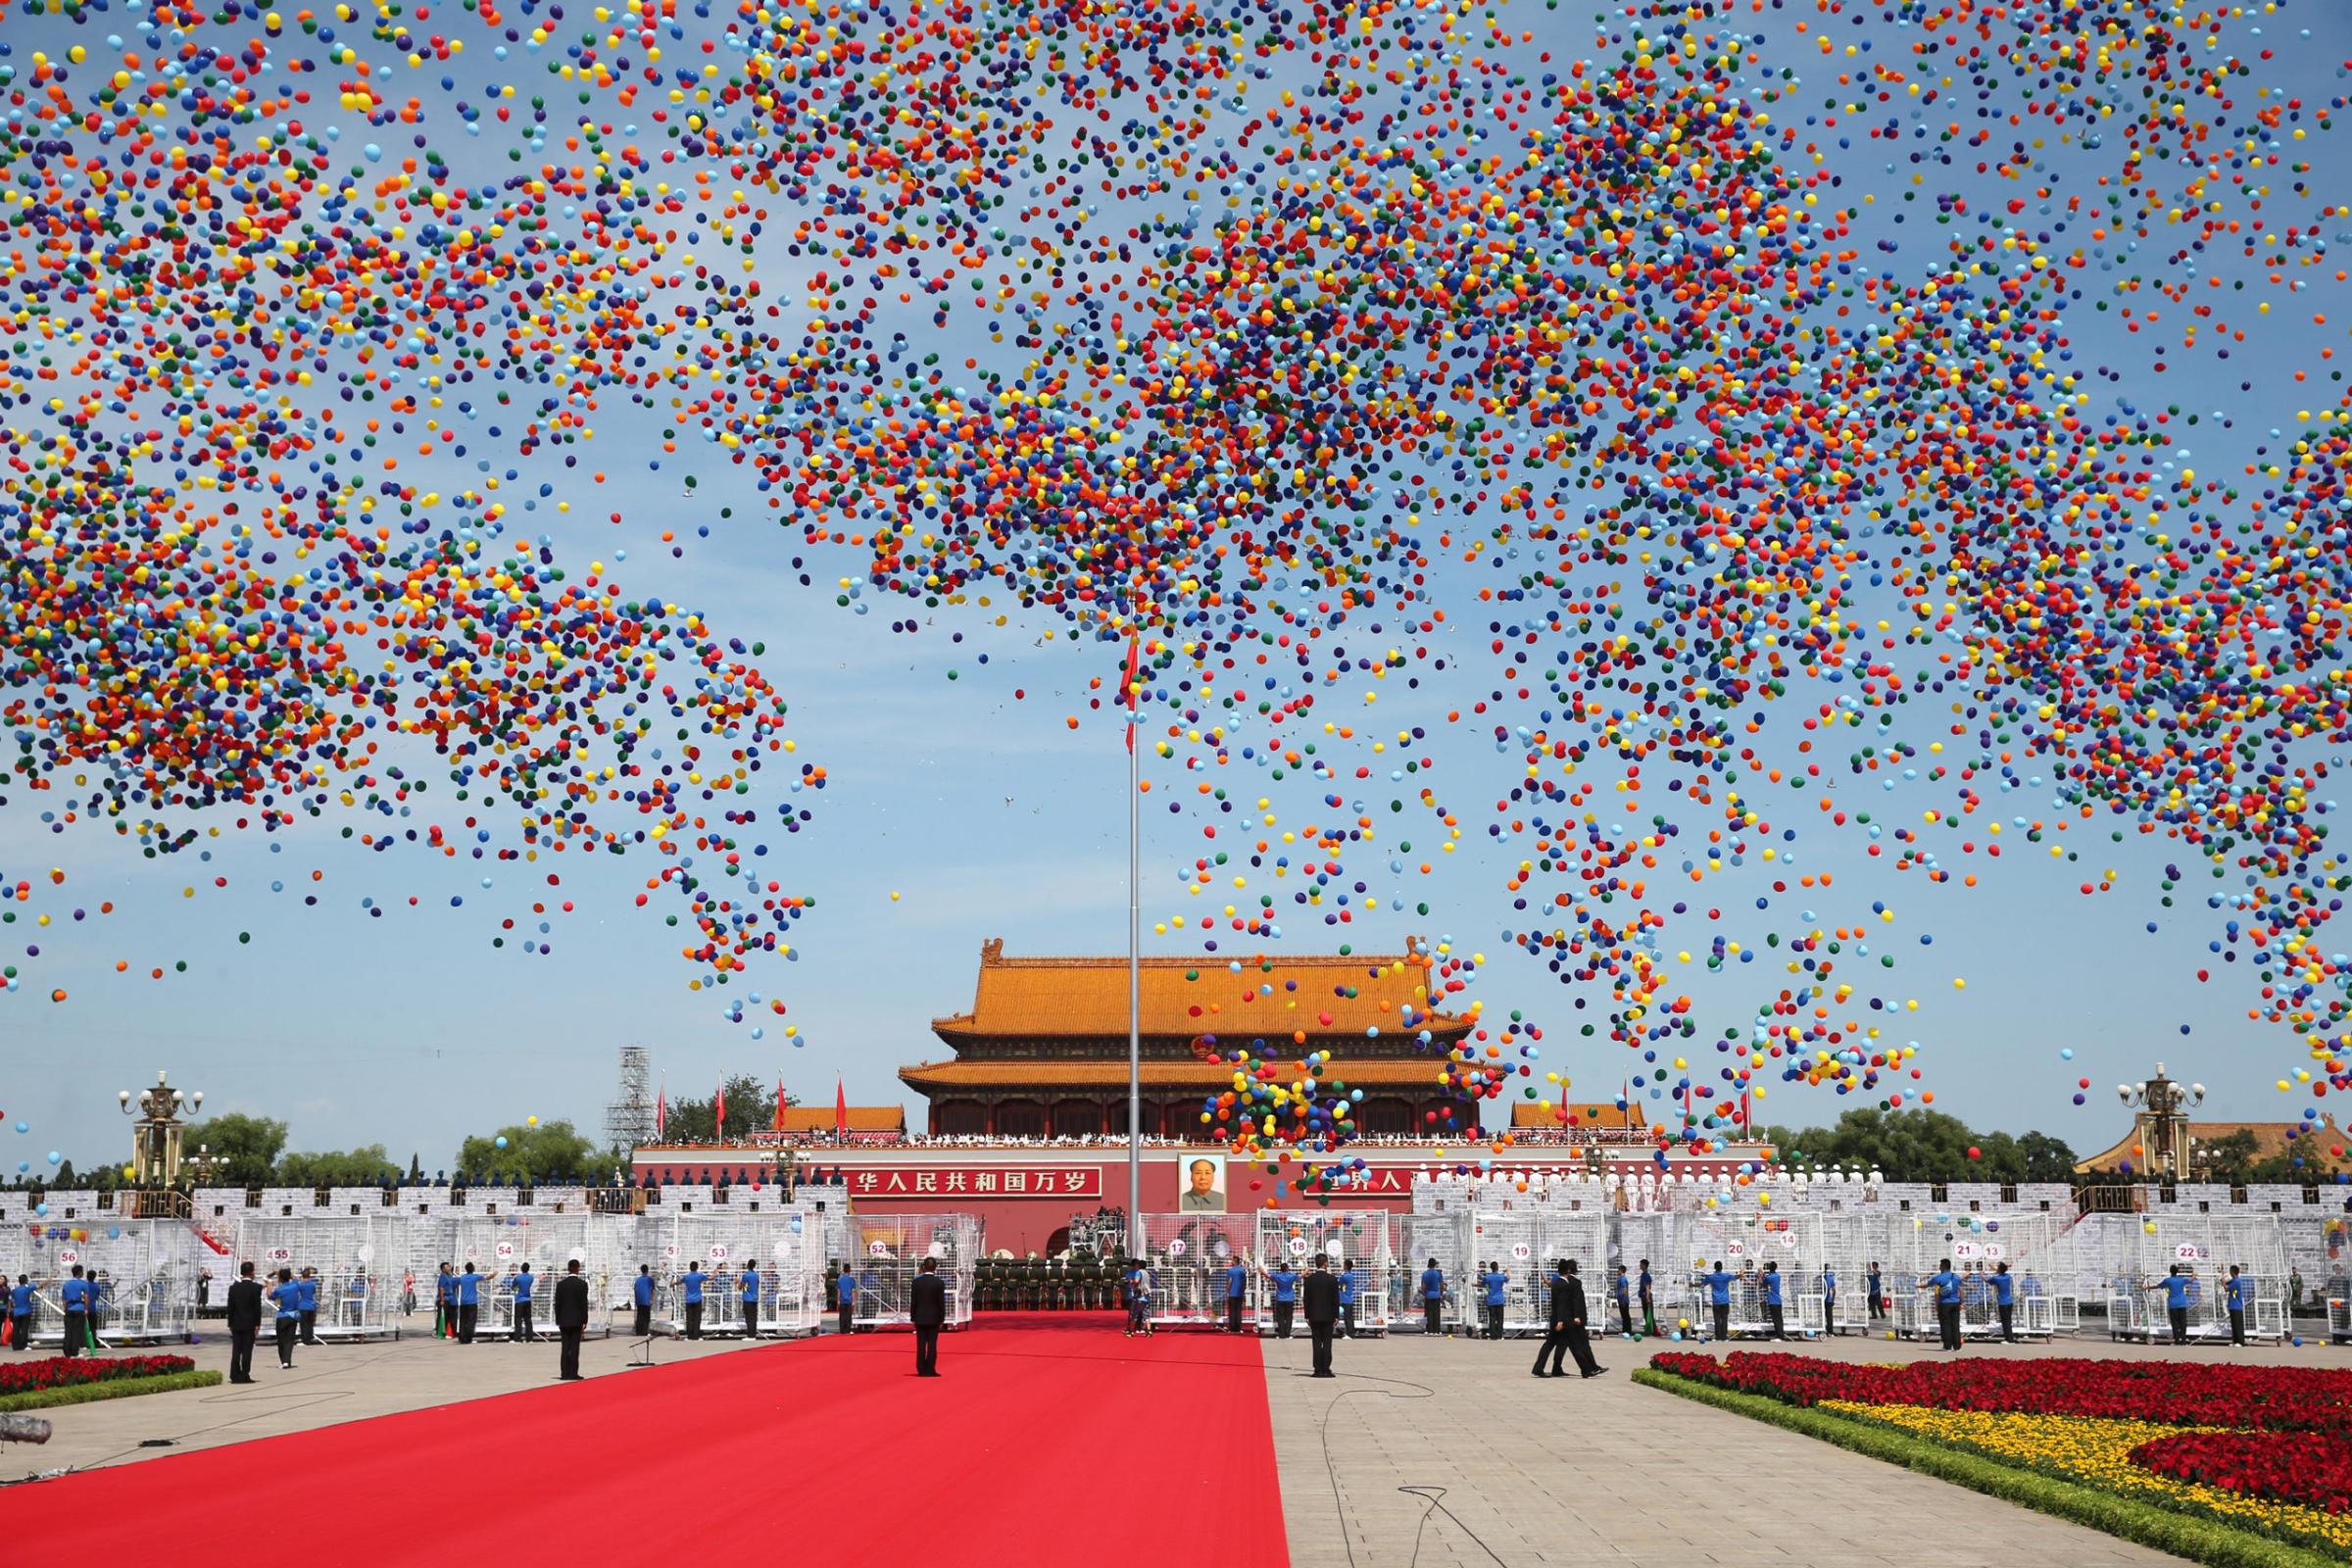 03 Sep 2015, Beijing, China --- (150903) -- BEIJING, Sept. 3, 2015 (Xinhua) -- Colorful balloons are released during the commemoration activities to mark the 70th anniversary of the victory of the Chinese People's War of Resistance Against Japanese Aggression and the World Anti-Fascist War, in Beijing, capital of China, Sept. 3, 2015. (Xinhua/Meng Yongmin)(mcg) --- Image by © Meng Yongmin/Xinhua Press/Corbis